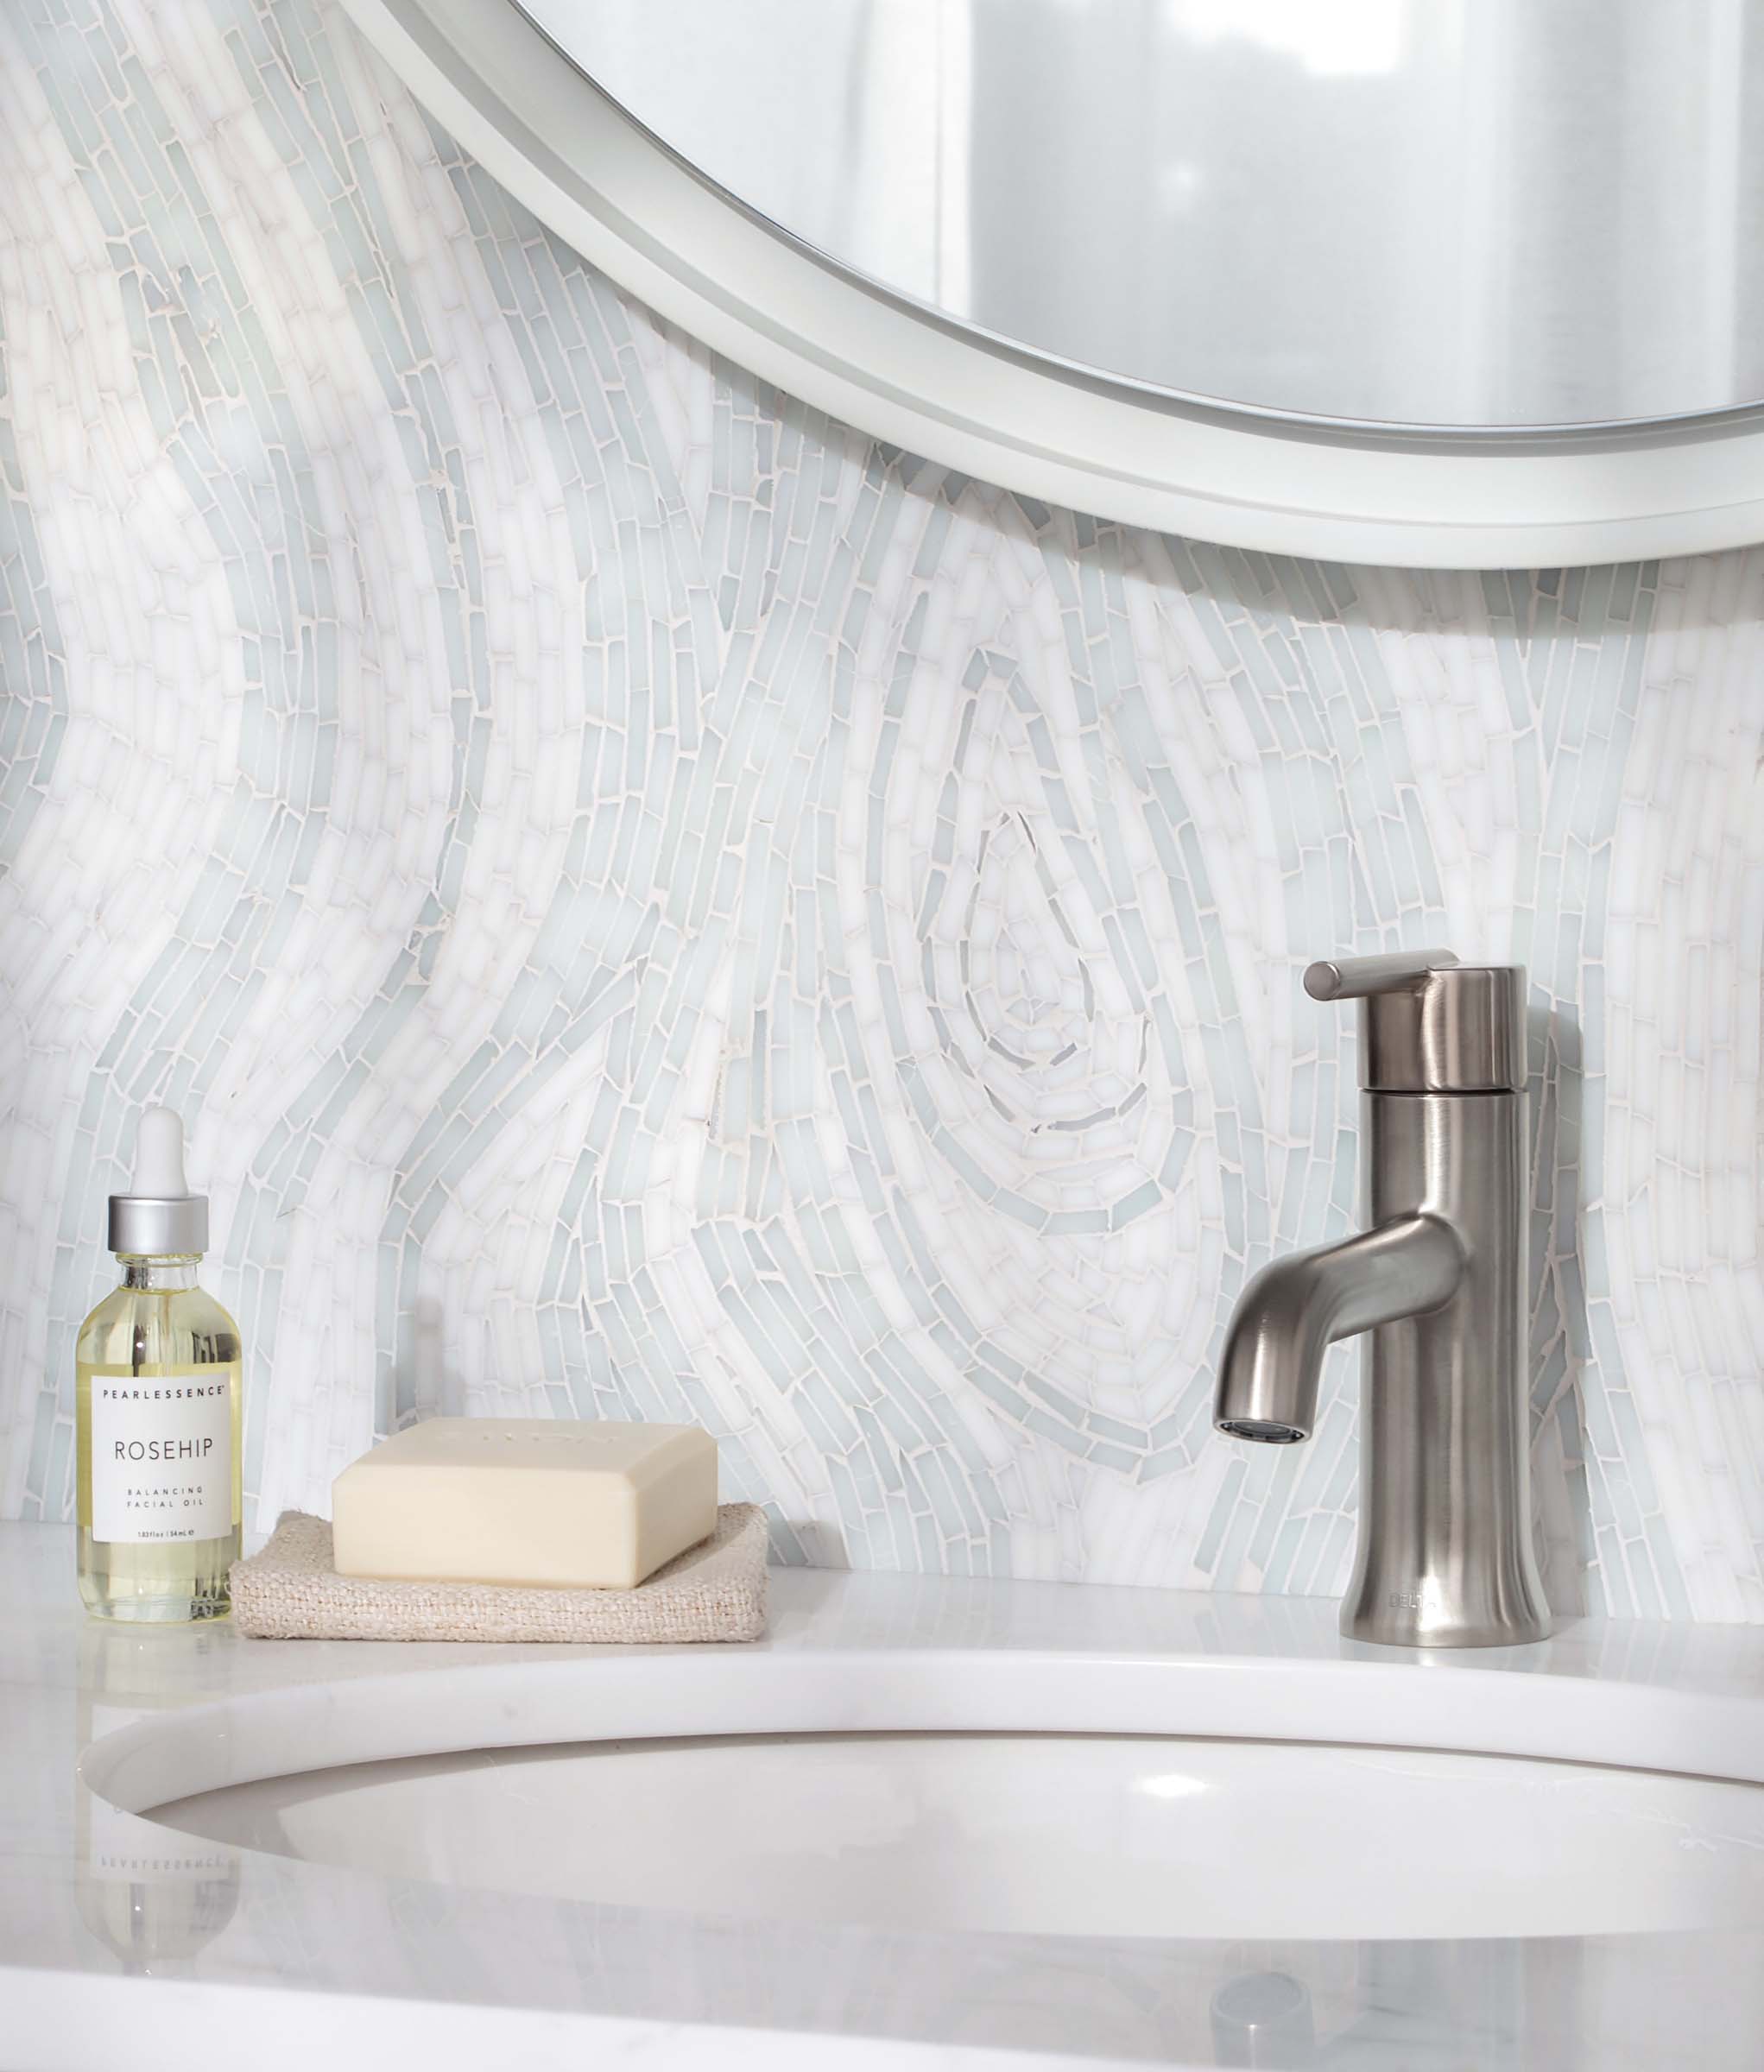 Maji jewel glass mosaic is hand-cut and shown in Moonstone and Opal Sea Glass™. Designed by Joni Vanderslice for New Ravenna.